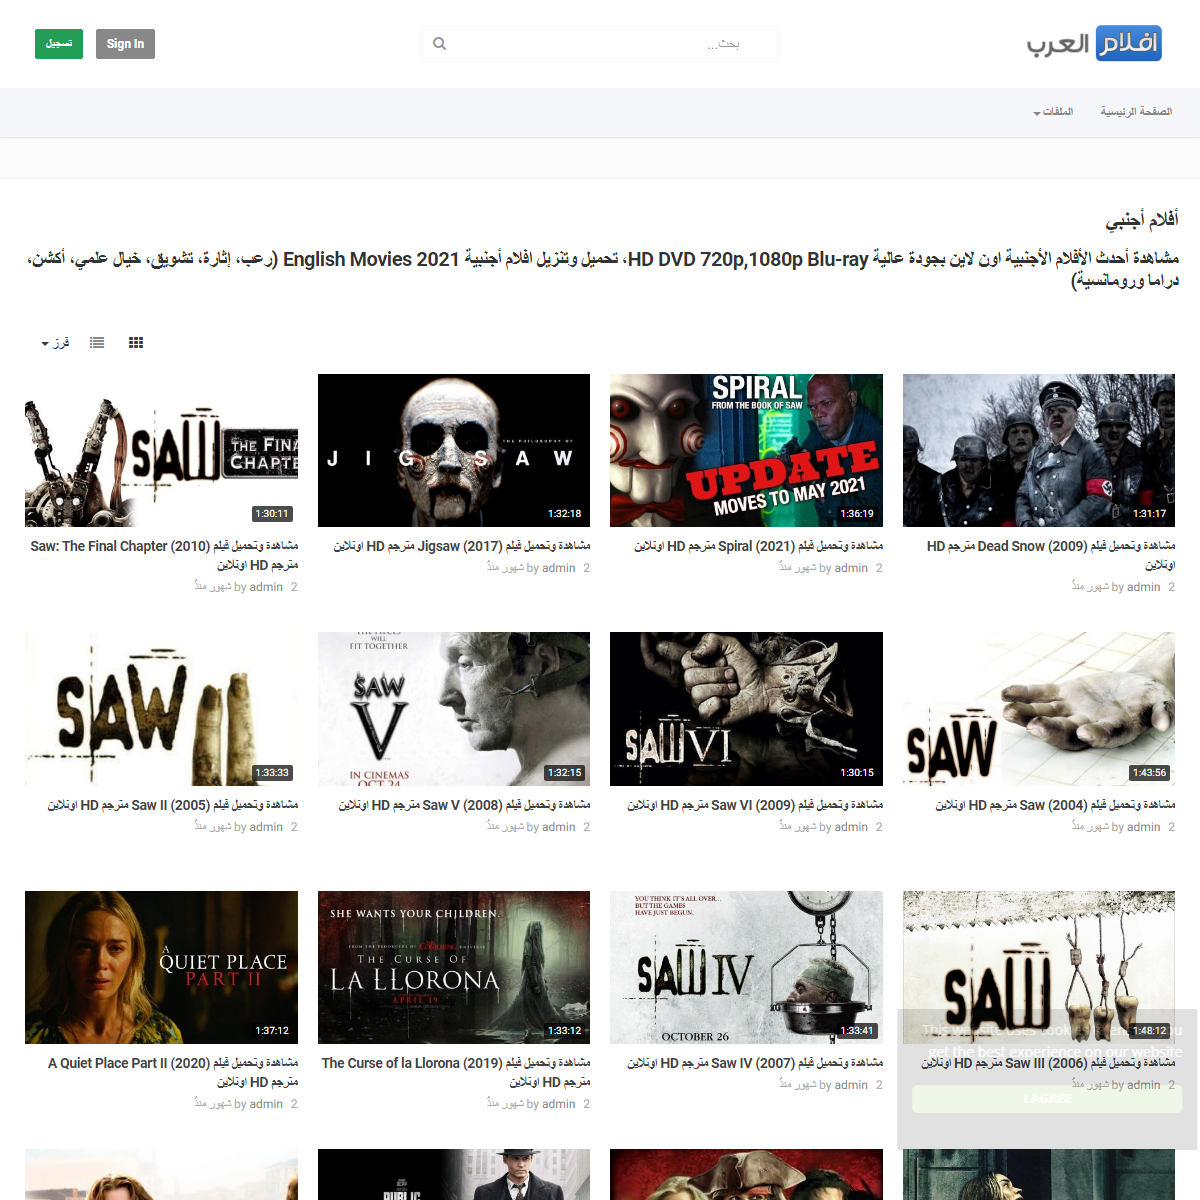 A complete backup of https://arab-moviez.tv/category.php?cat=english-movies&page=22&order=DESC